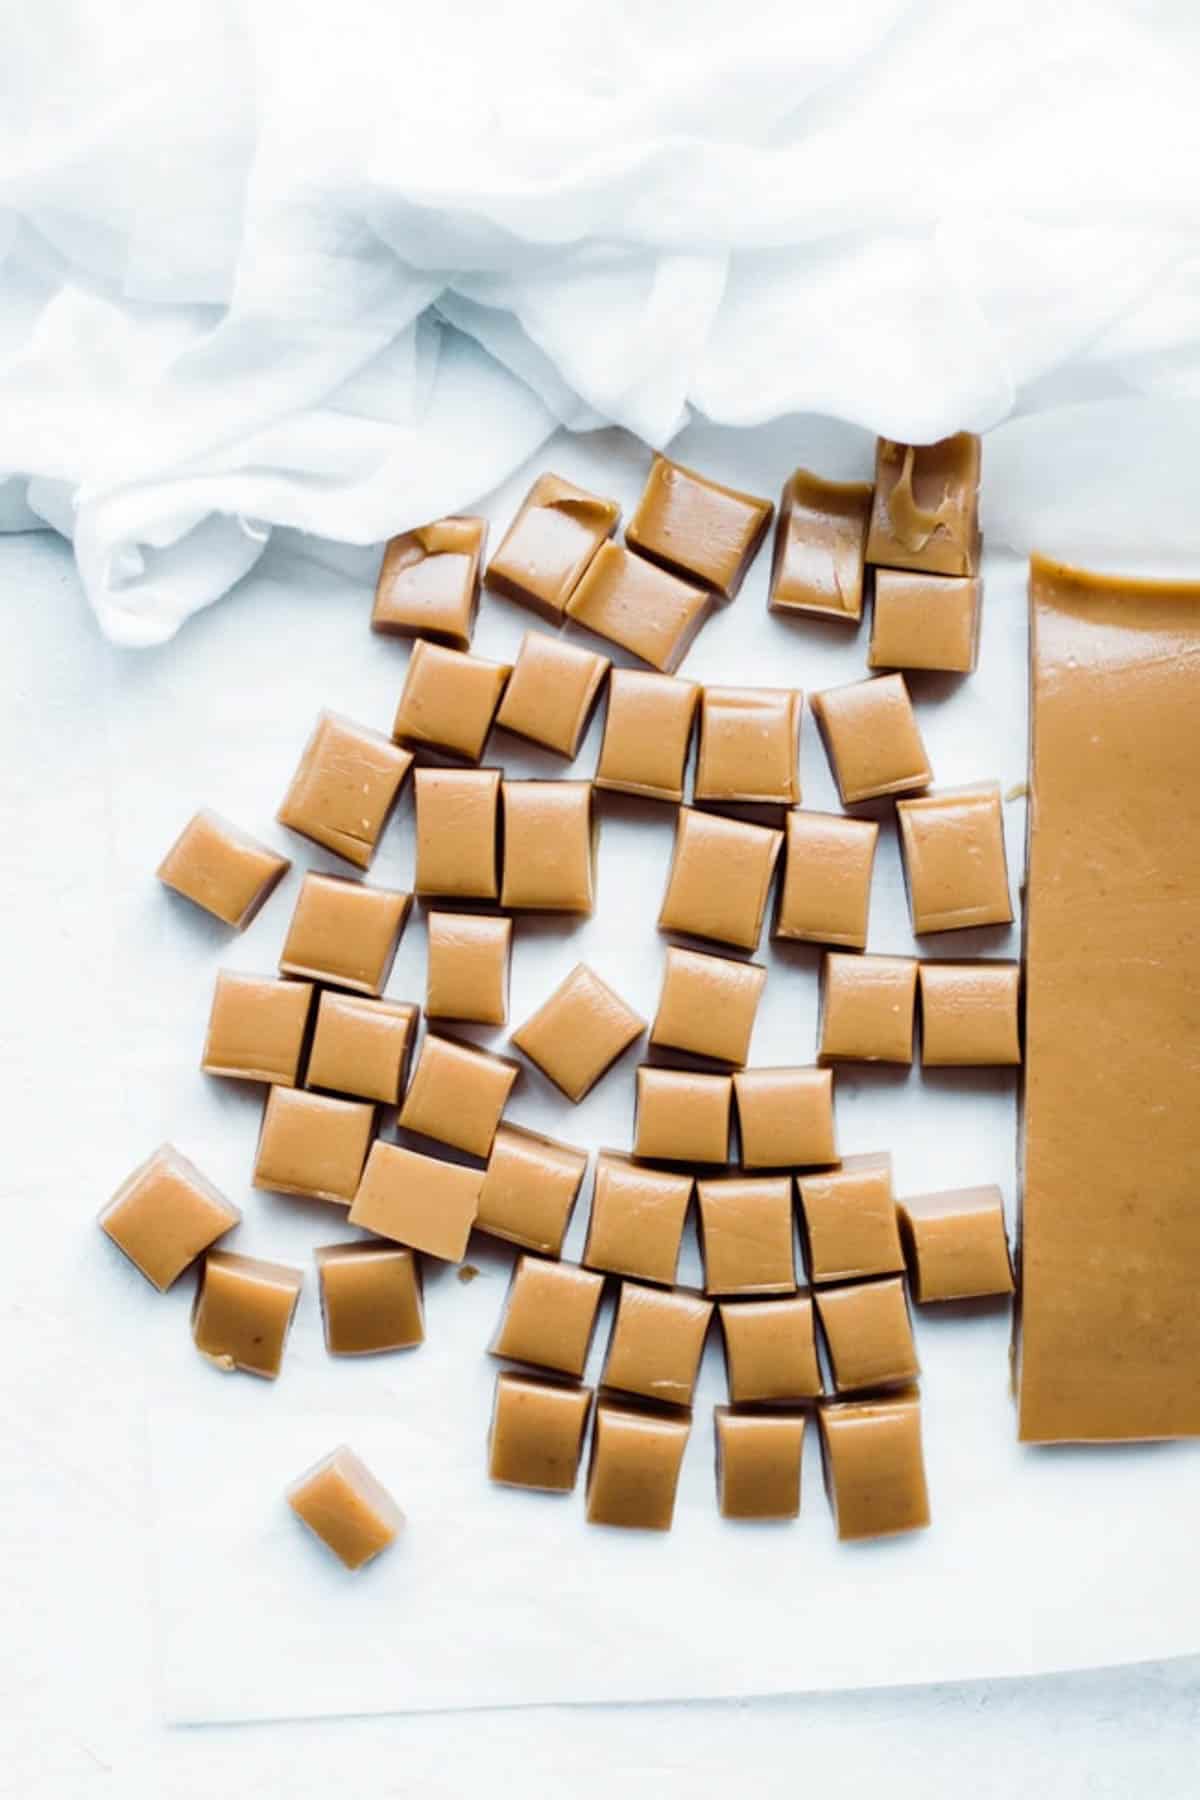 Caramel from pan being cut into squares.